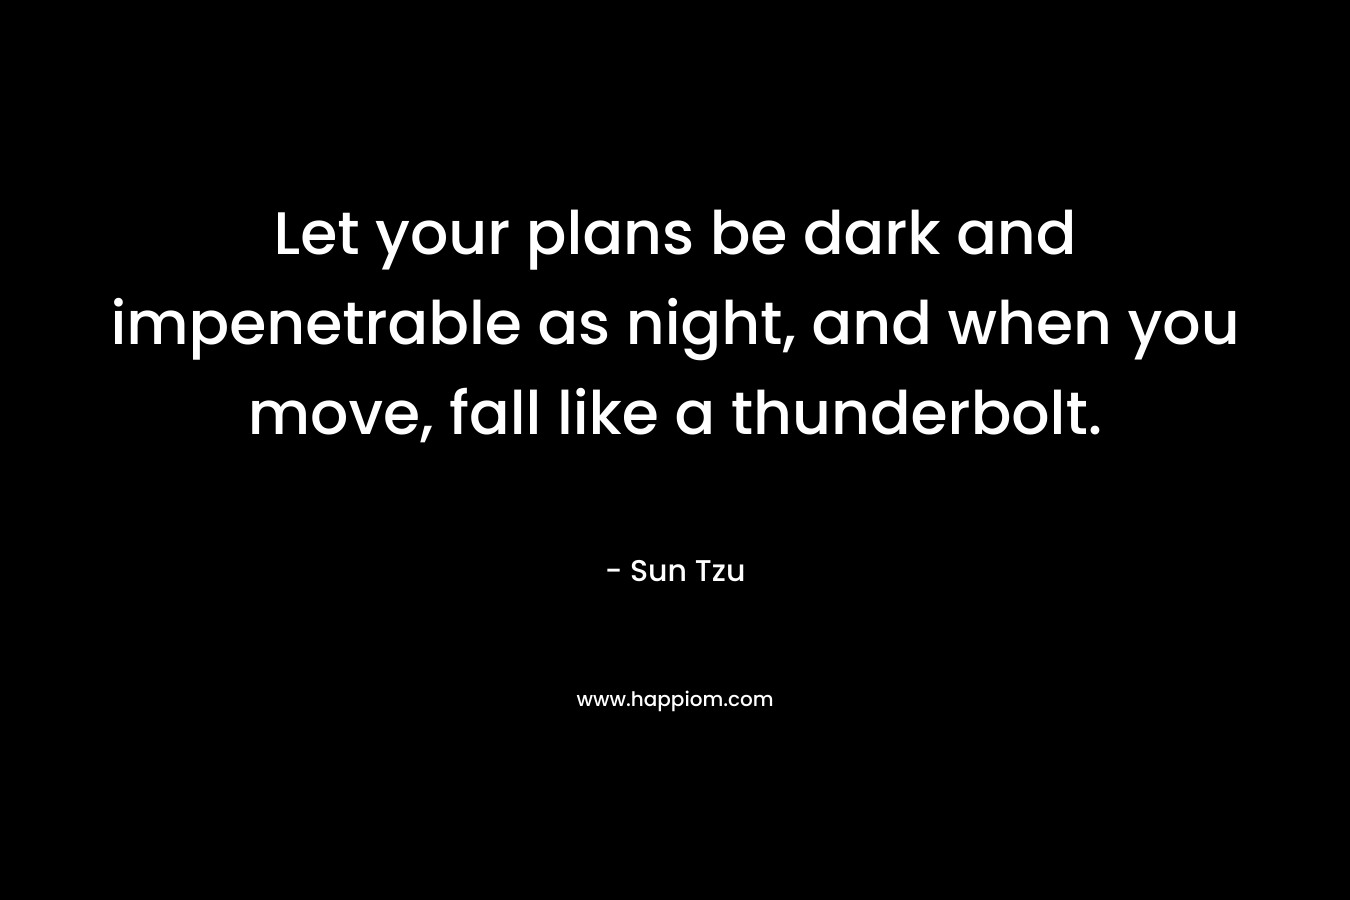 Let your plans be dark and impenetrable as night, and when you move, fall like a thunderbolt. – Sun Tzu